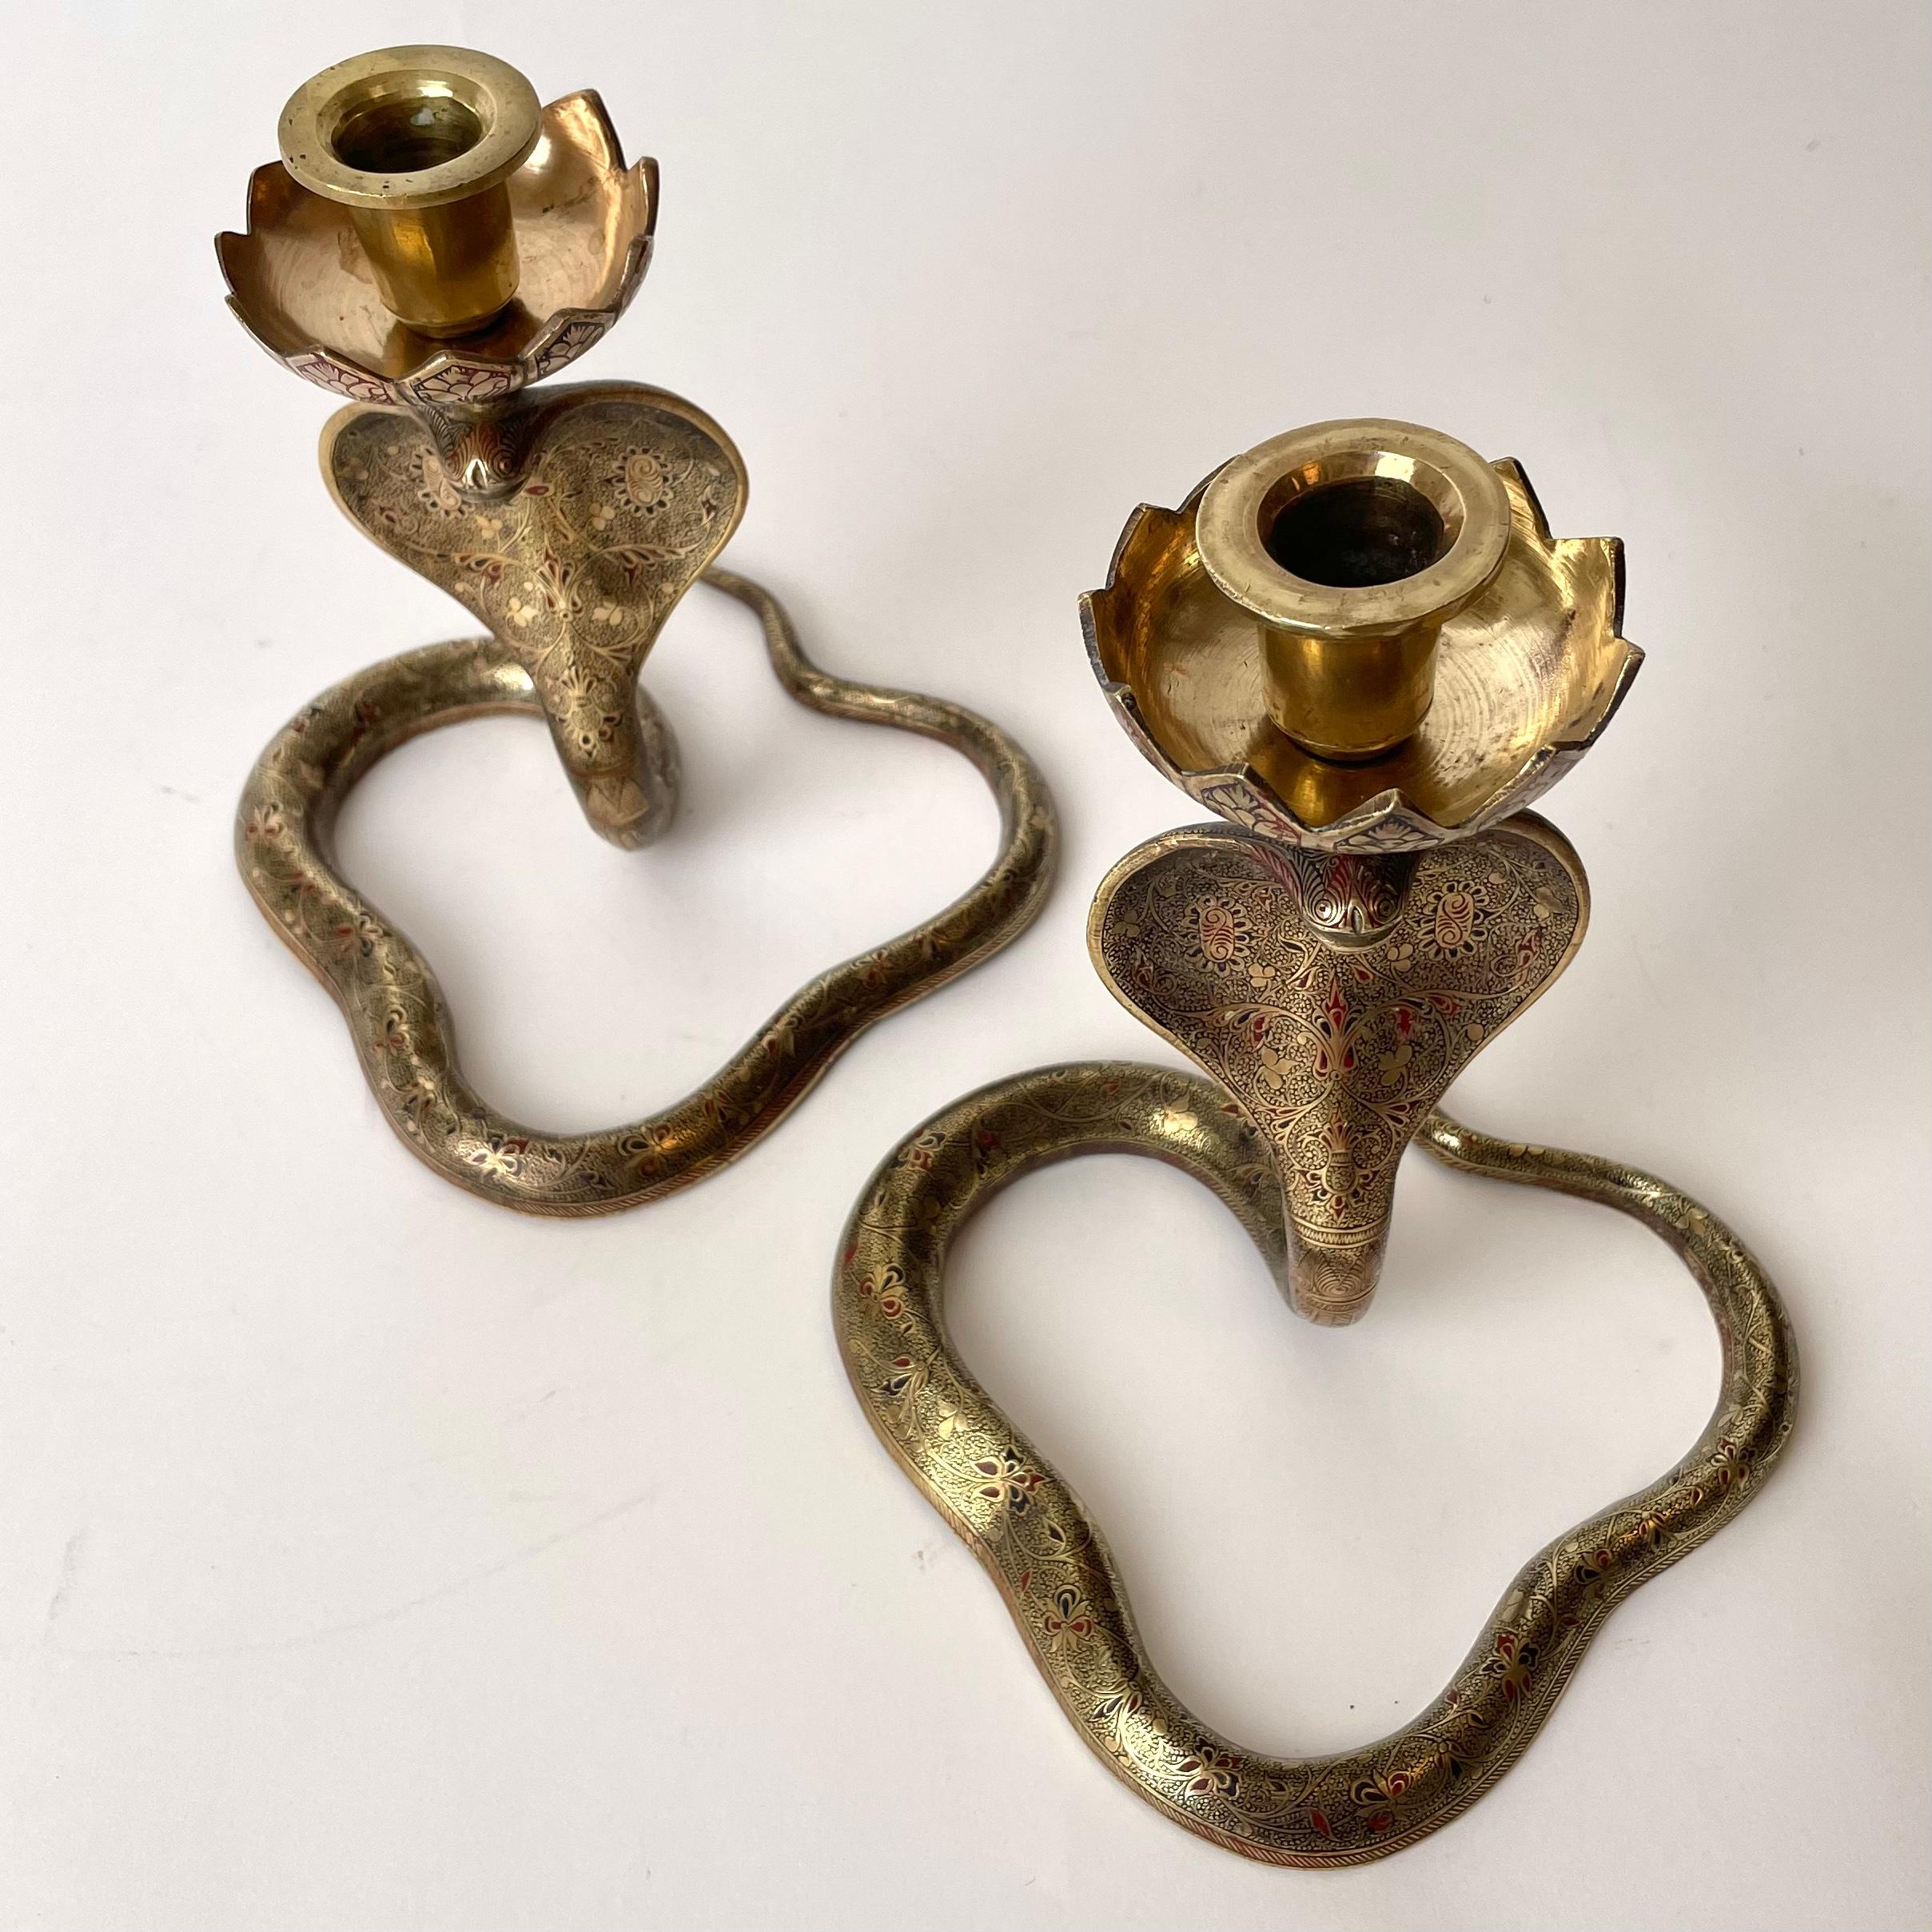 Art Deco Cool Pair of Brass Cobra Candlesticks from the 1930s